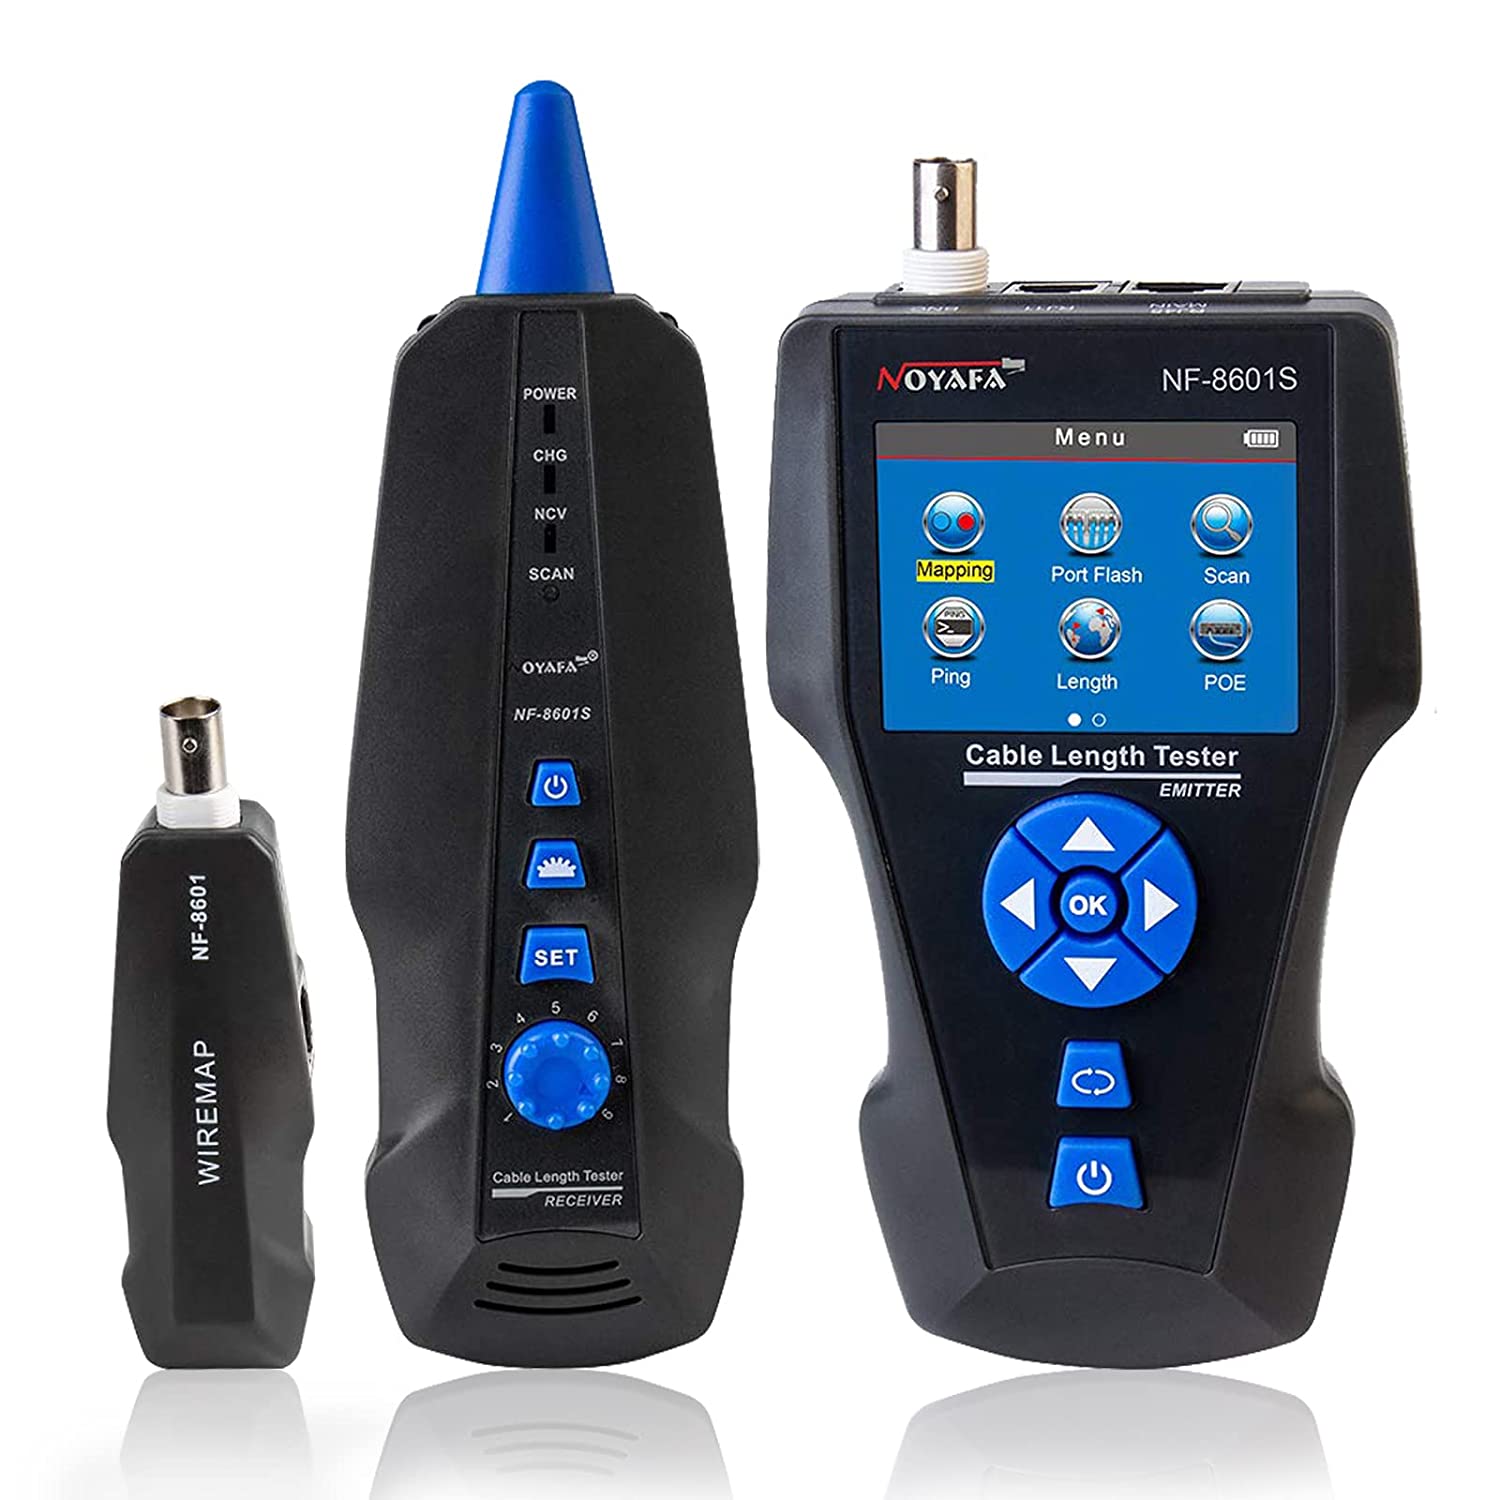 Buy Network Cable Tester & Wire Tracer NF-8209 - Free Shpping